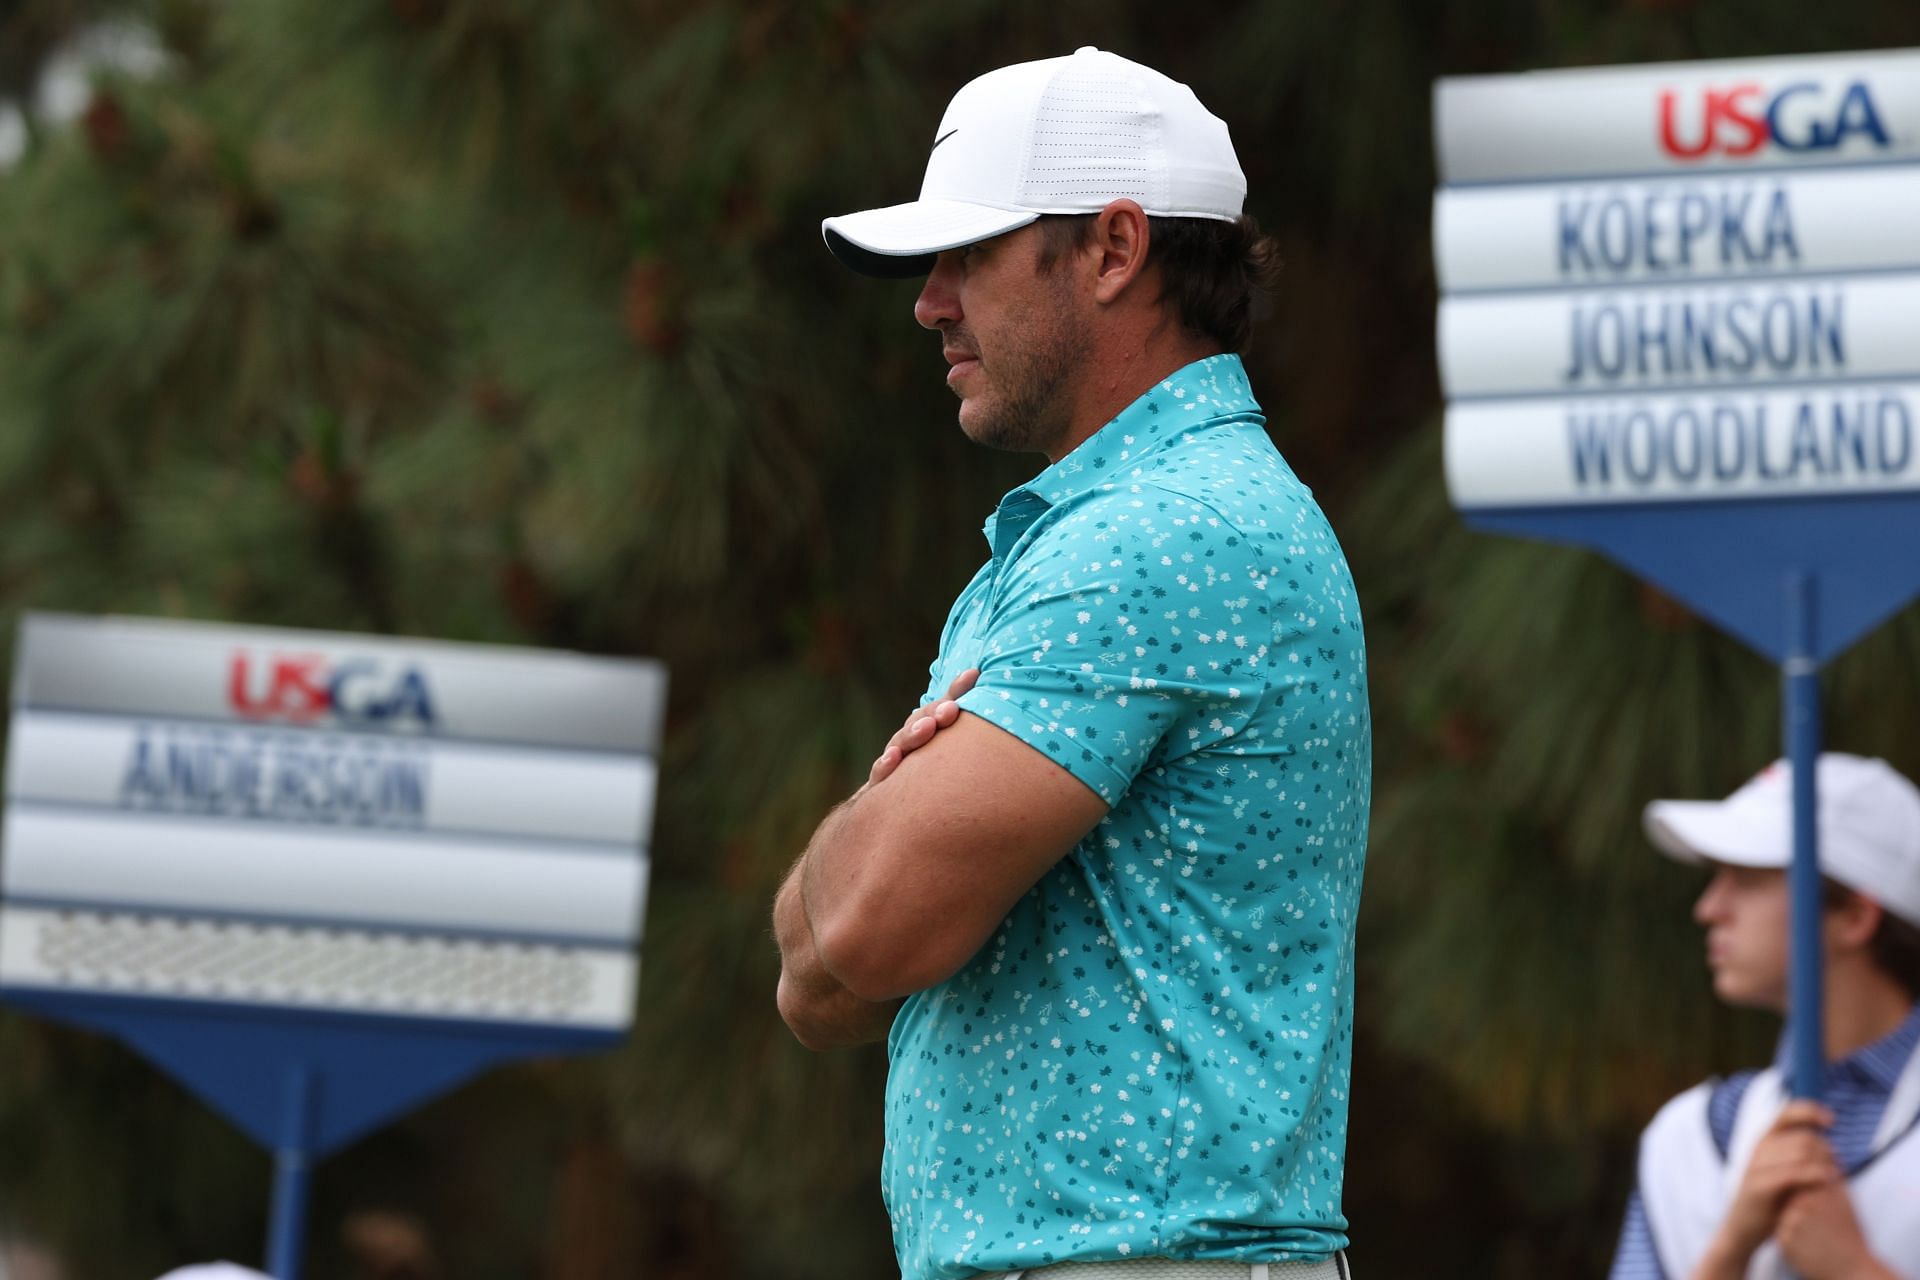 Can Brooks Koepka win another major?